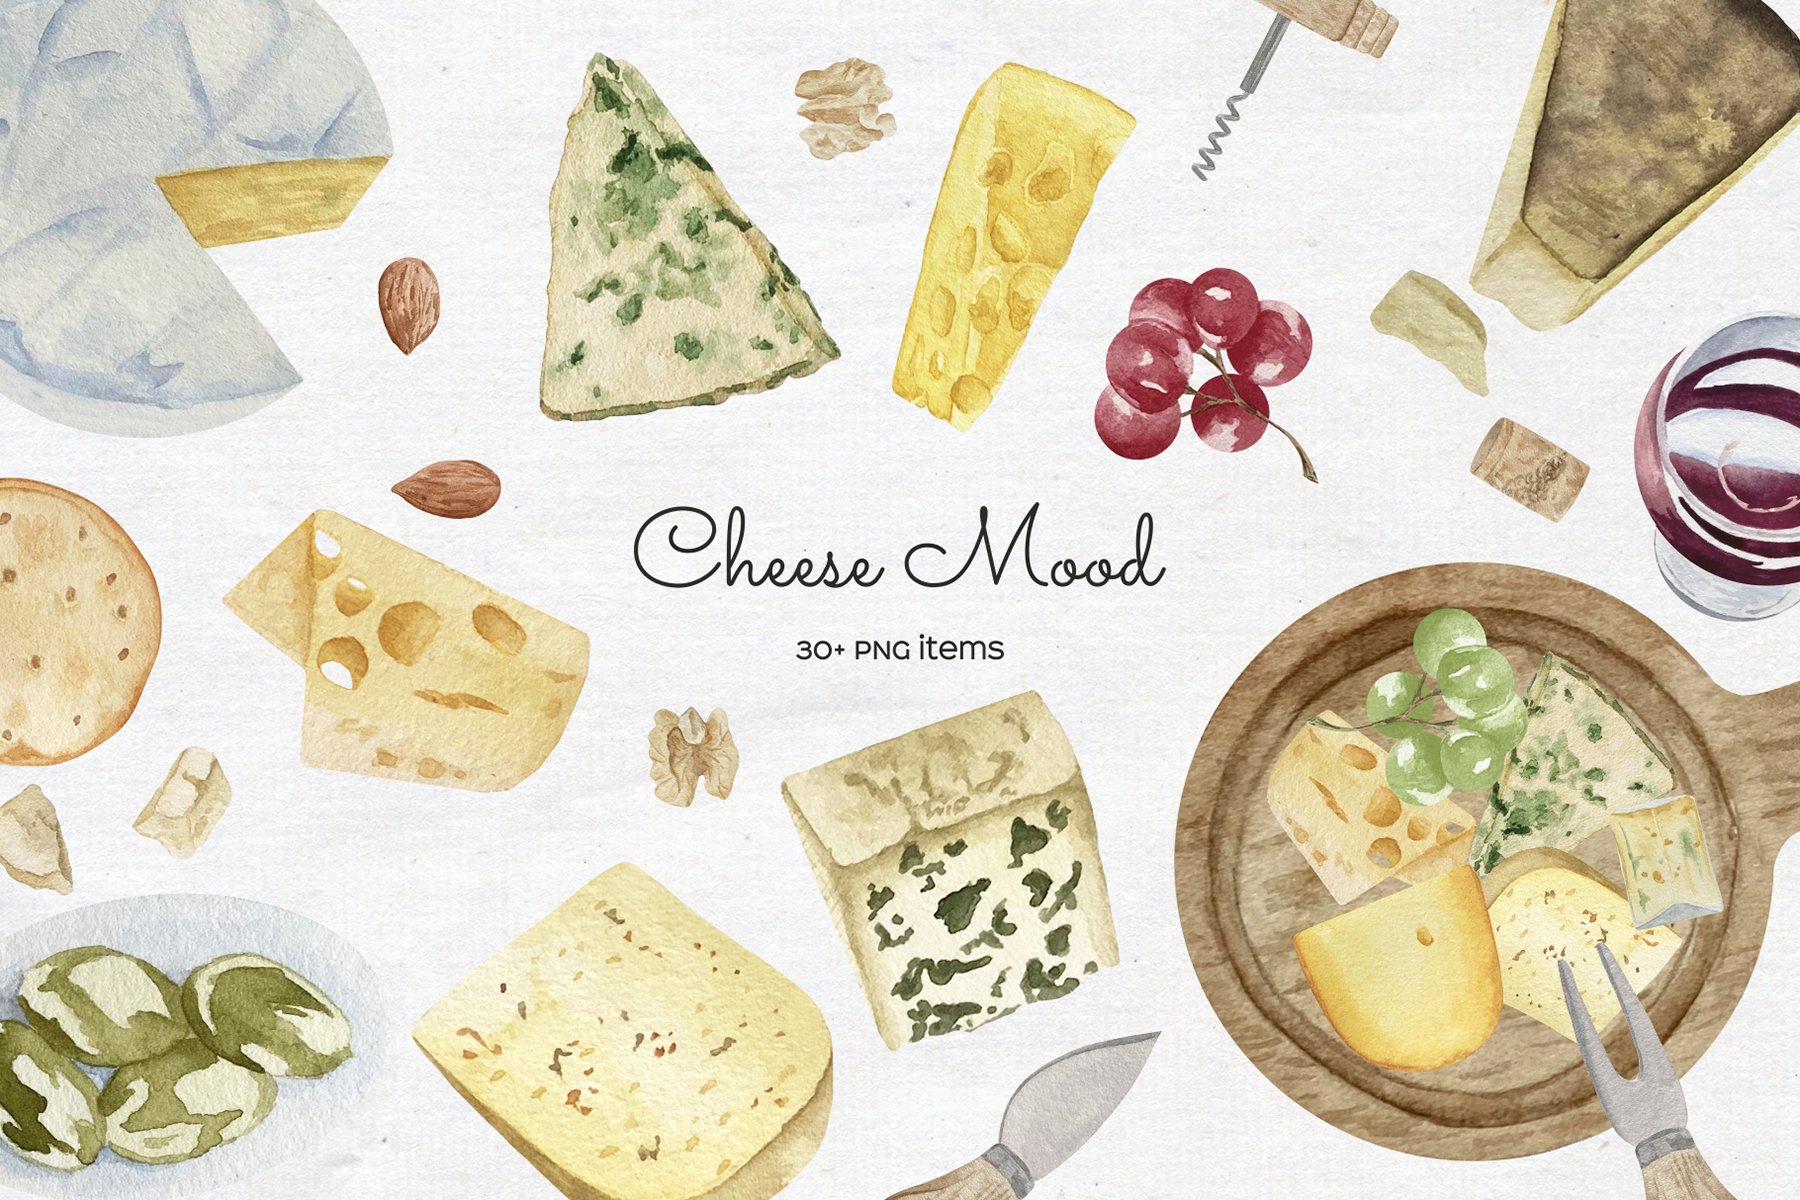 A collection of marvelous images of gourmet cheeses.